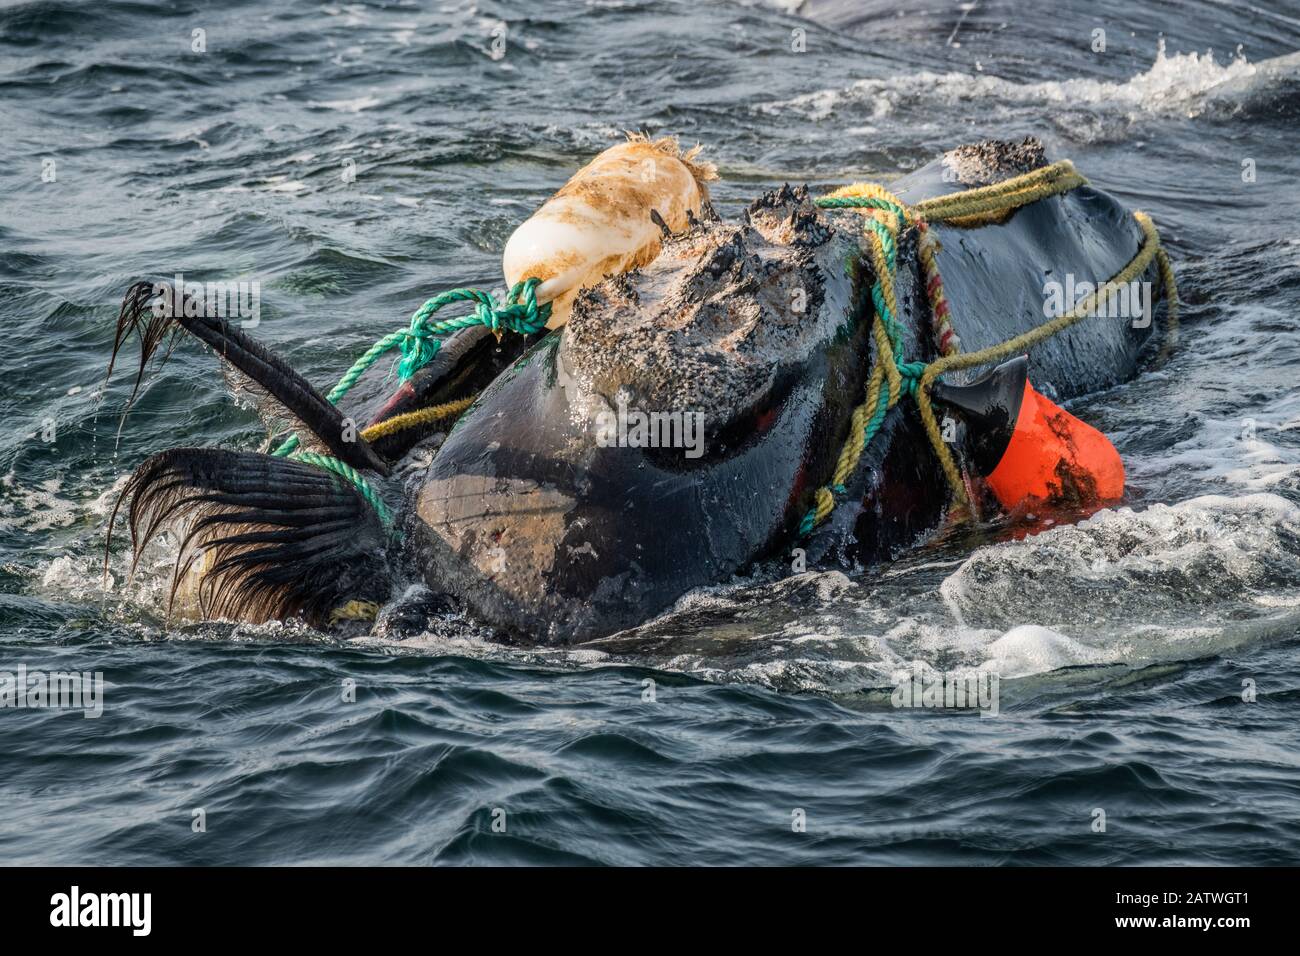 Fishing ropes wrap around the head and mouth, damaging the baleen of a severely entangled North Atlantic right whale (Eubalaena glacialis) in the Gulf of Saint Lawrence, Canada. Fishing gear entanglement is a leading cause of death in North Atlantic right whales. IUCN Status: Endangered. July Stock Photo